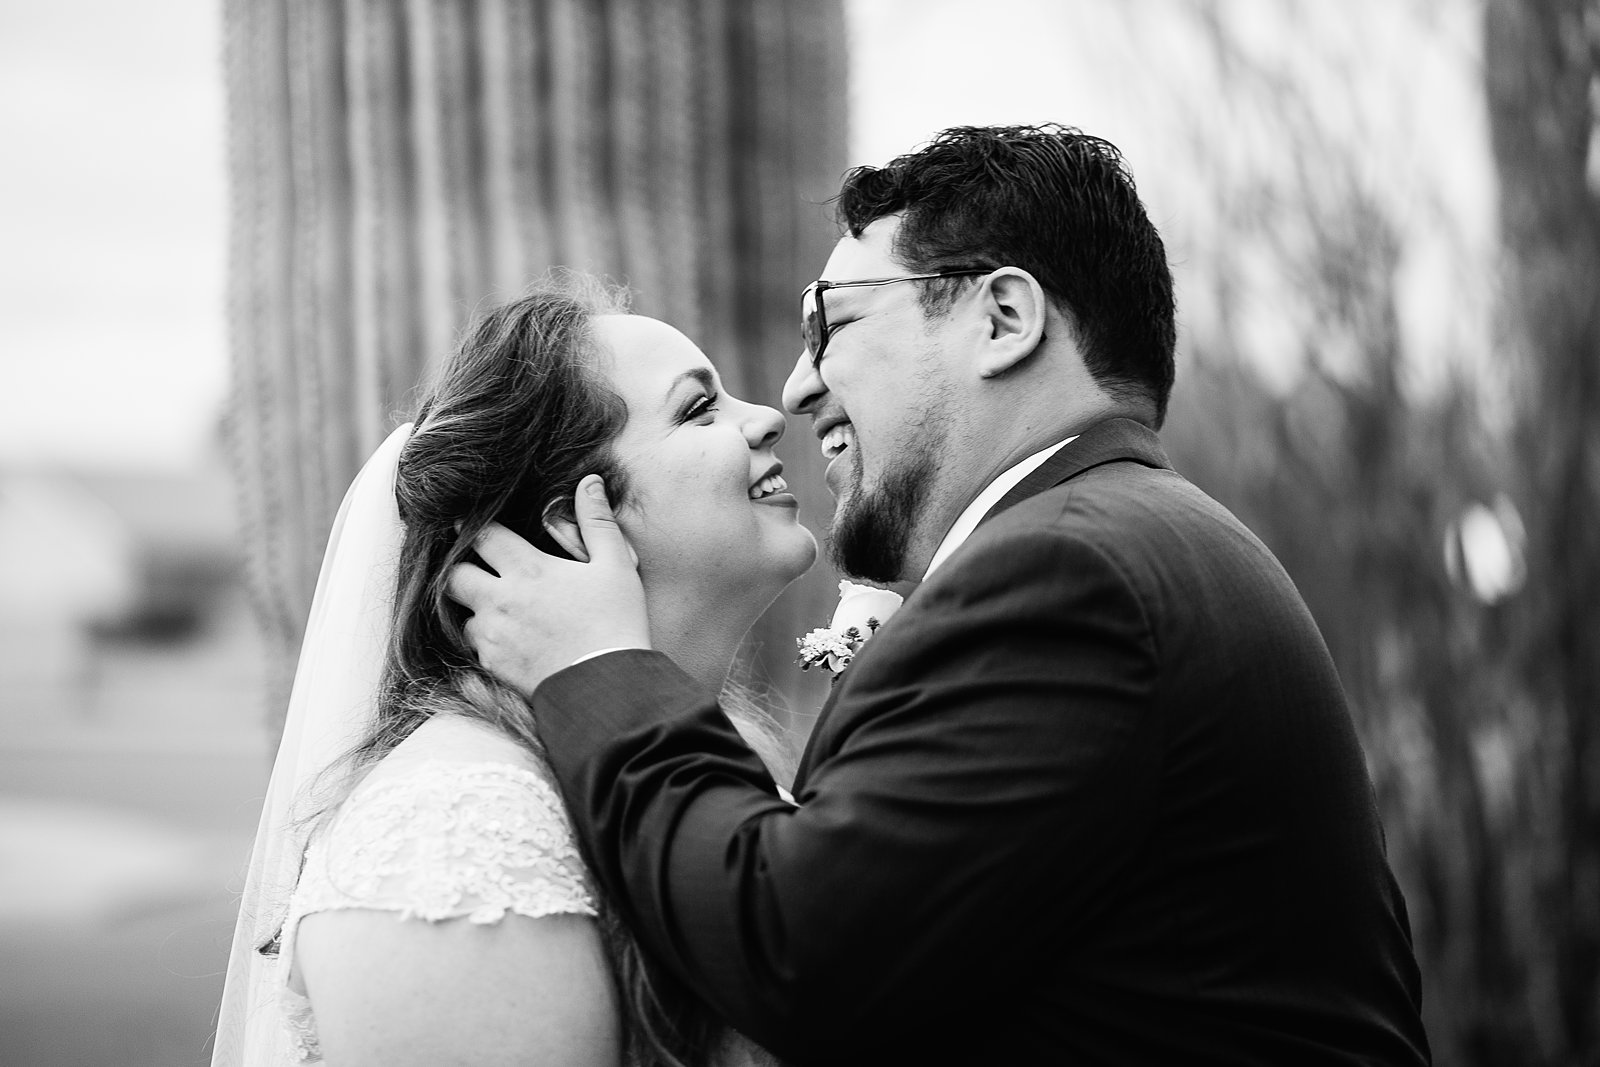 Bride and Groom share an intimate moment during their Backyard wedding by Casa Grande wedding photographer PMA Photography.